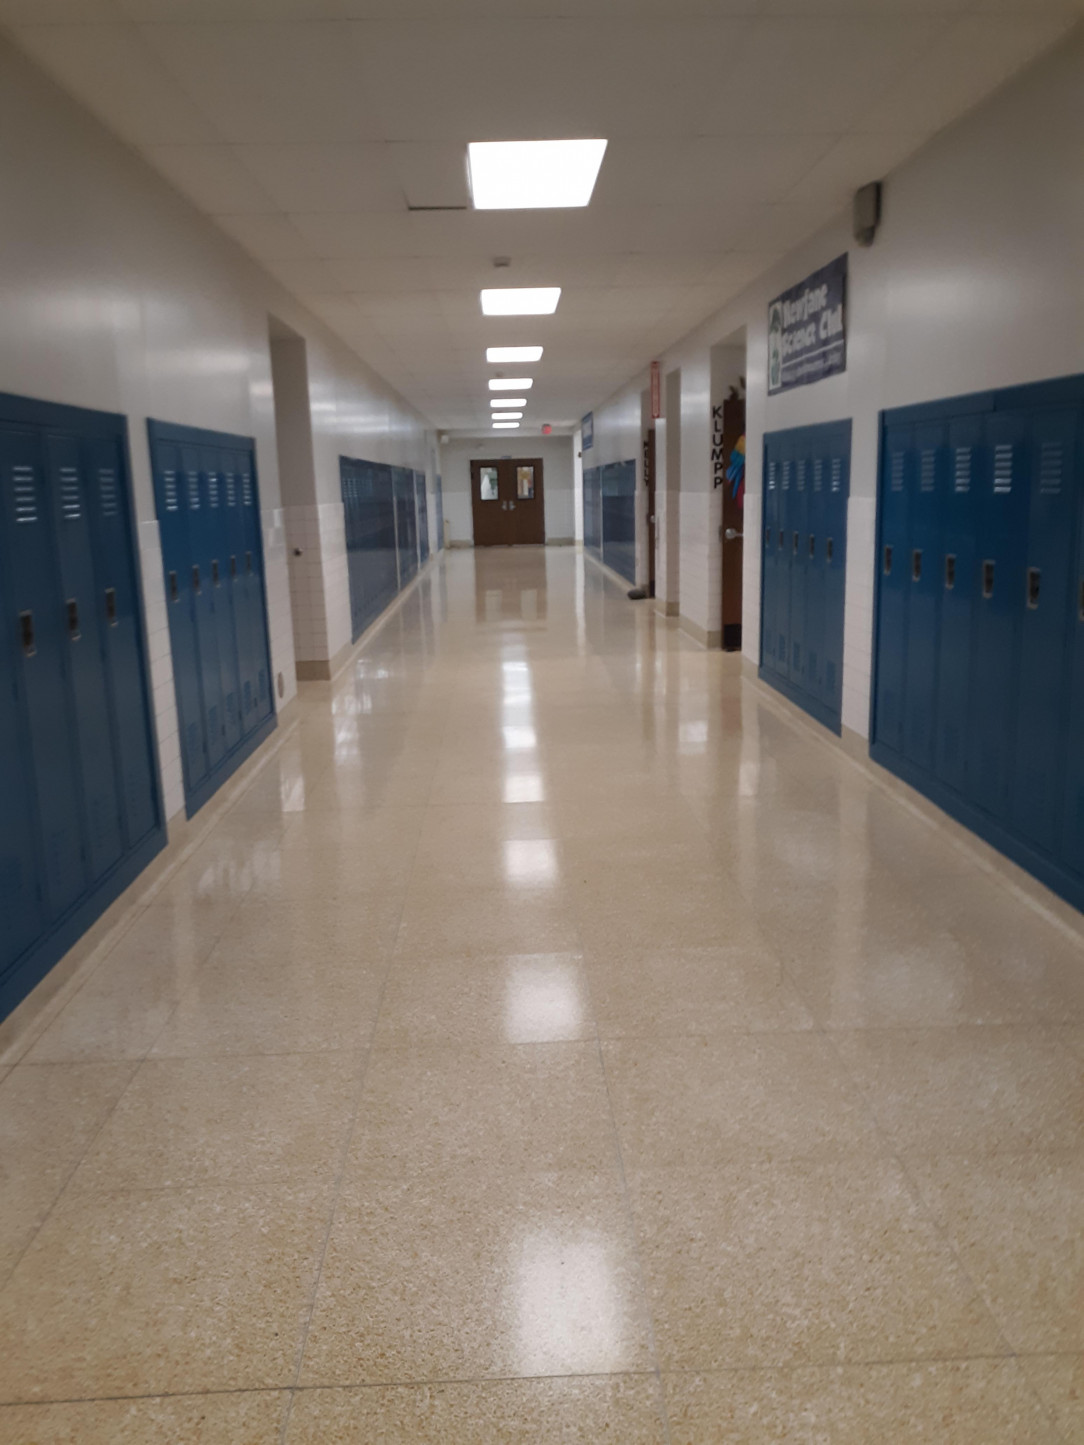 Why do empty schools give off such creepy vibes?